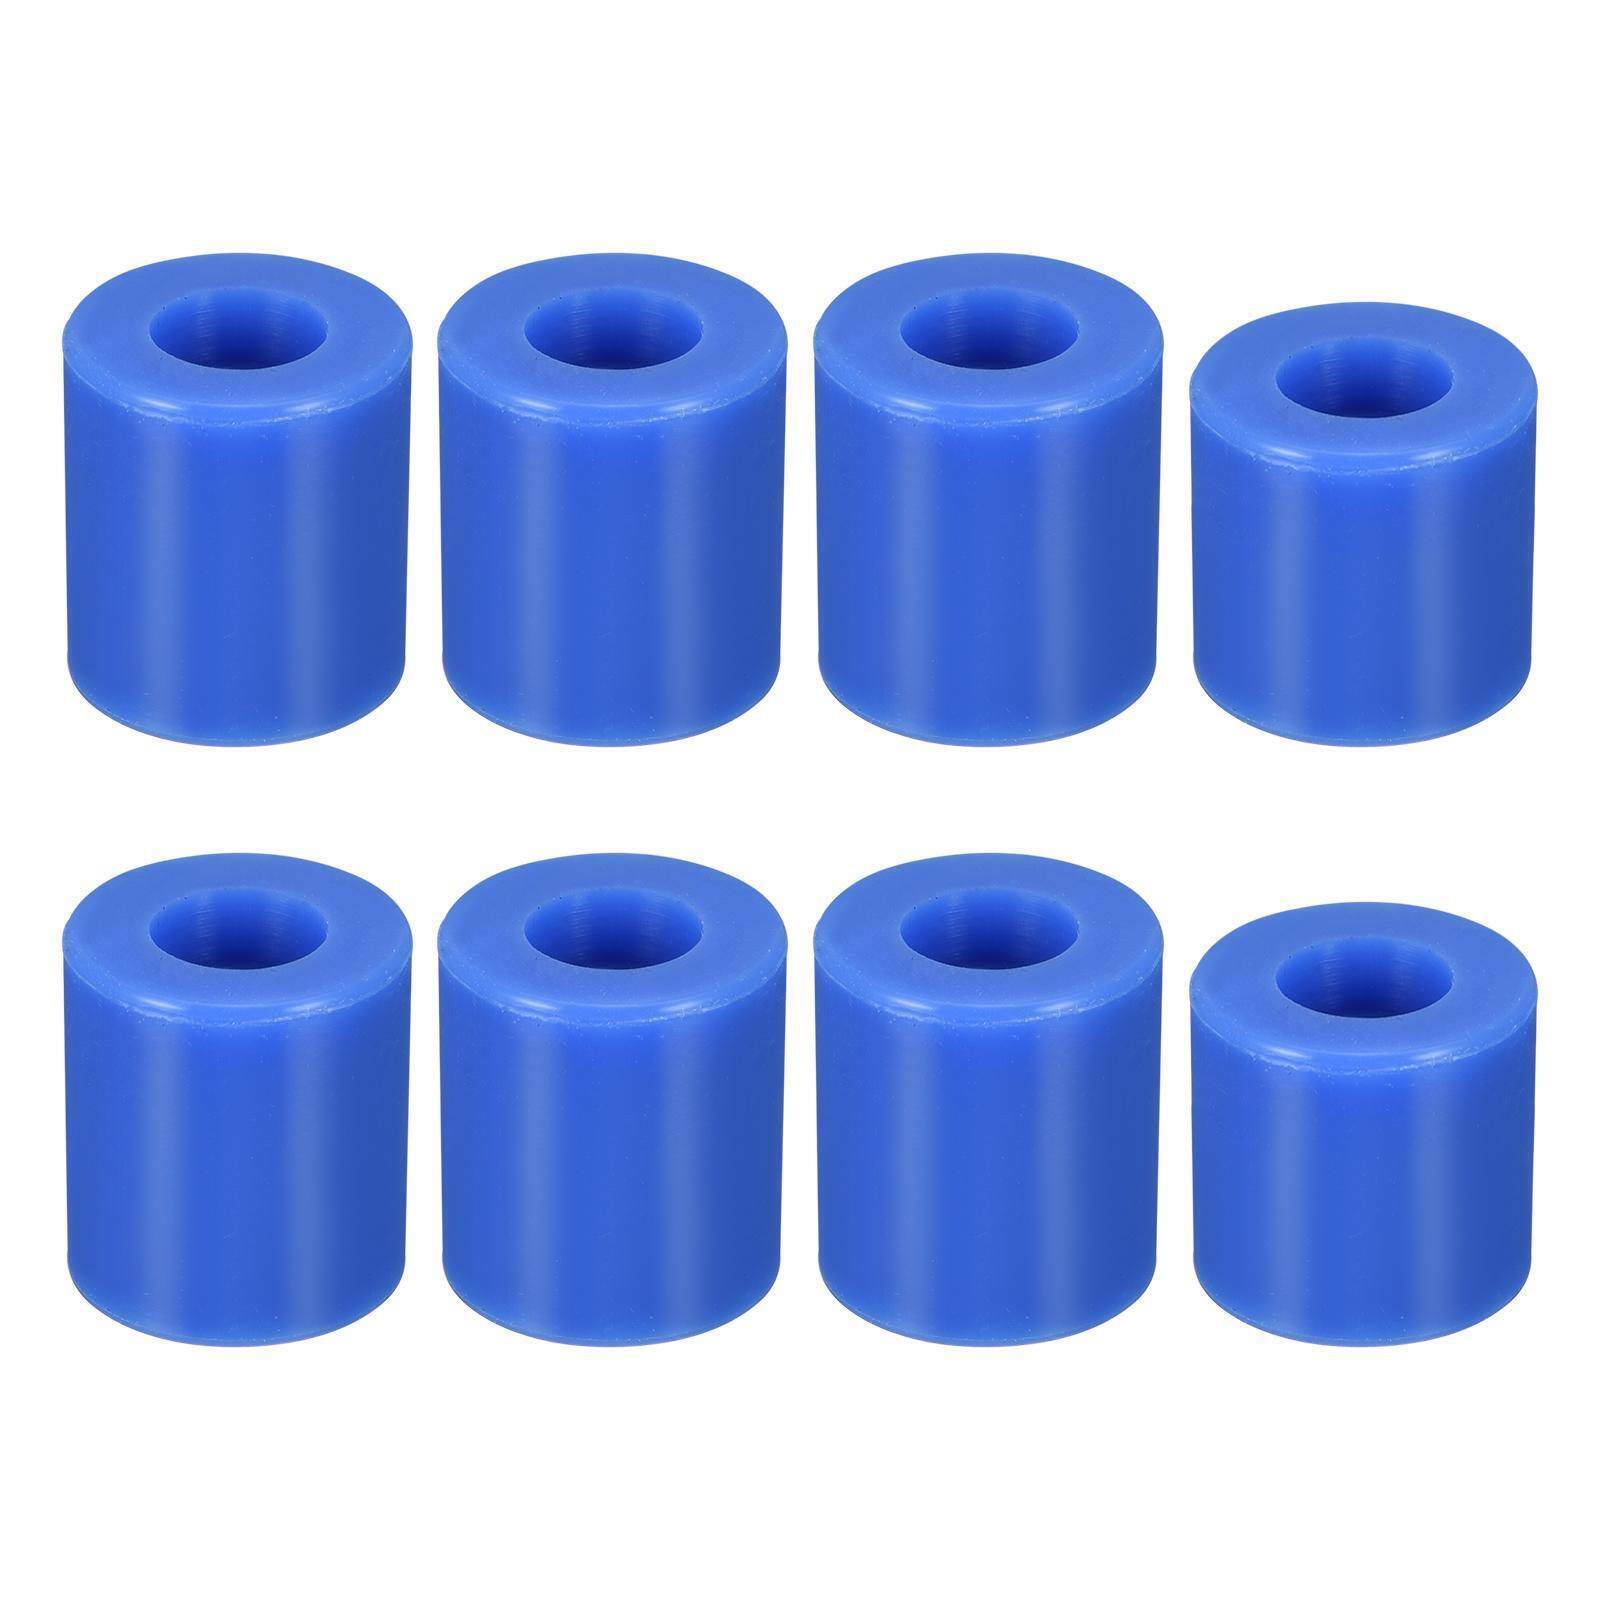 16mm/18mm 3D Printer Heat Bed Parts, Silicone Solid Bed Mounts,Blue 2set